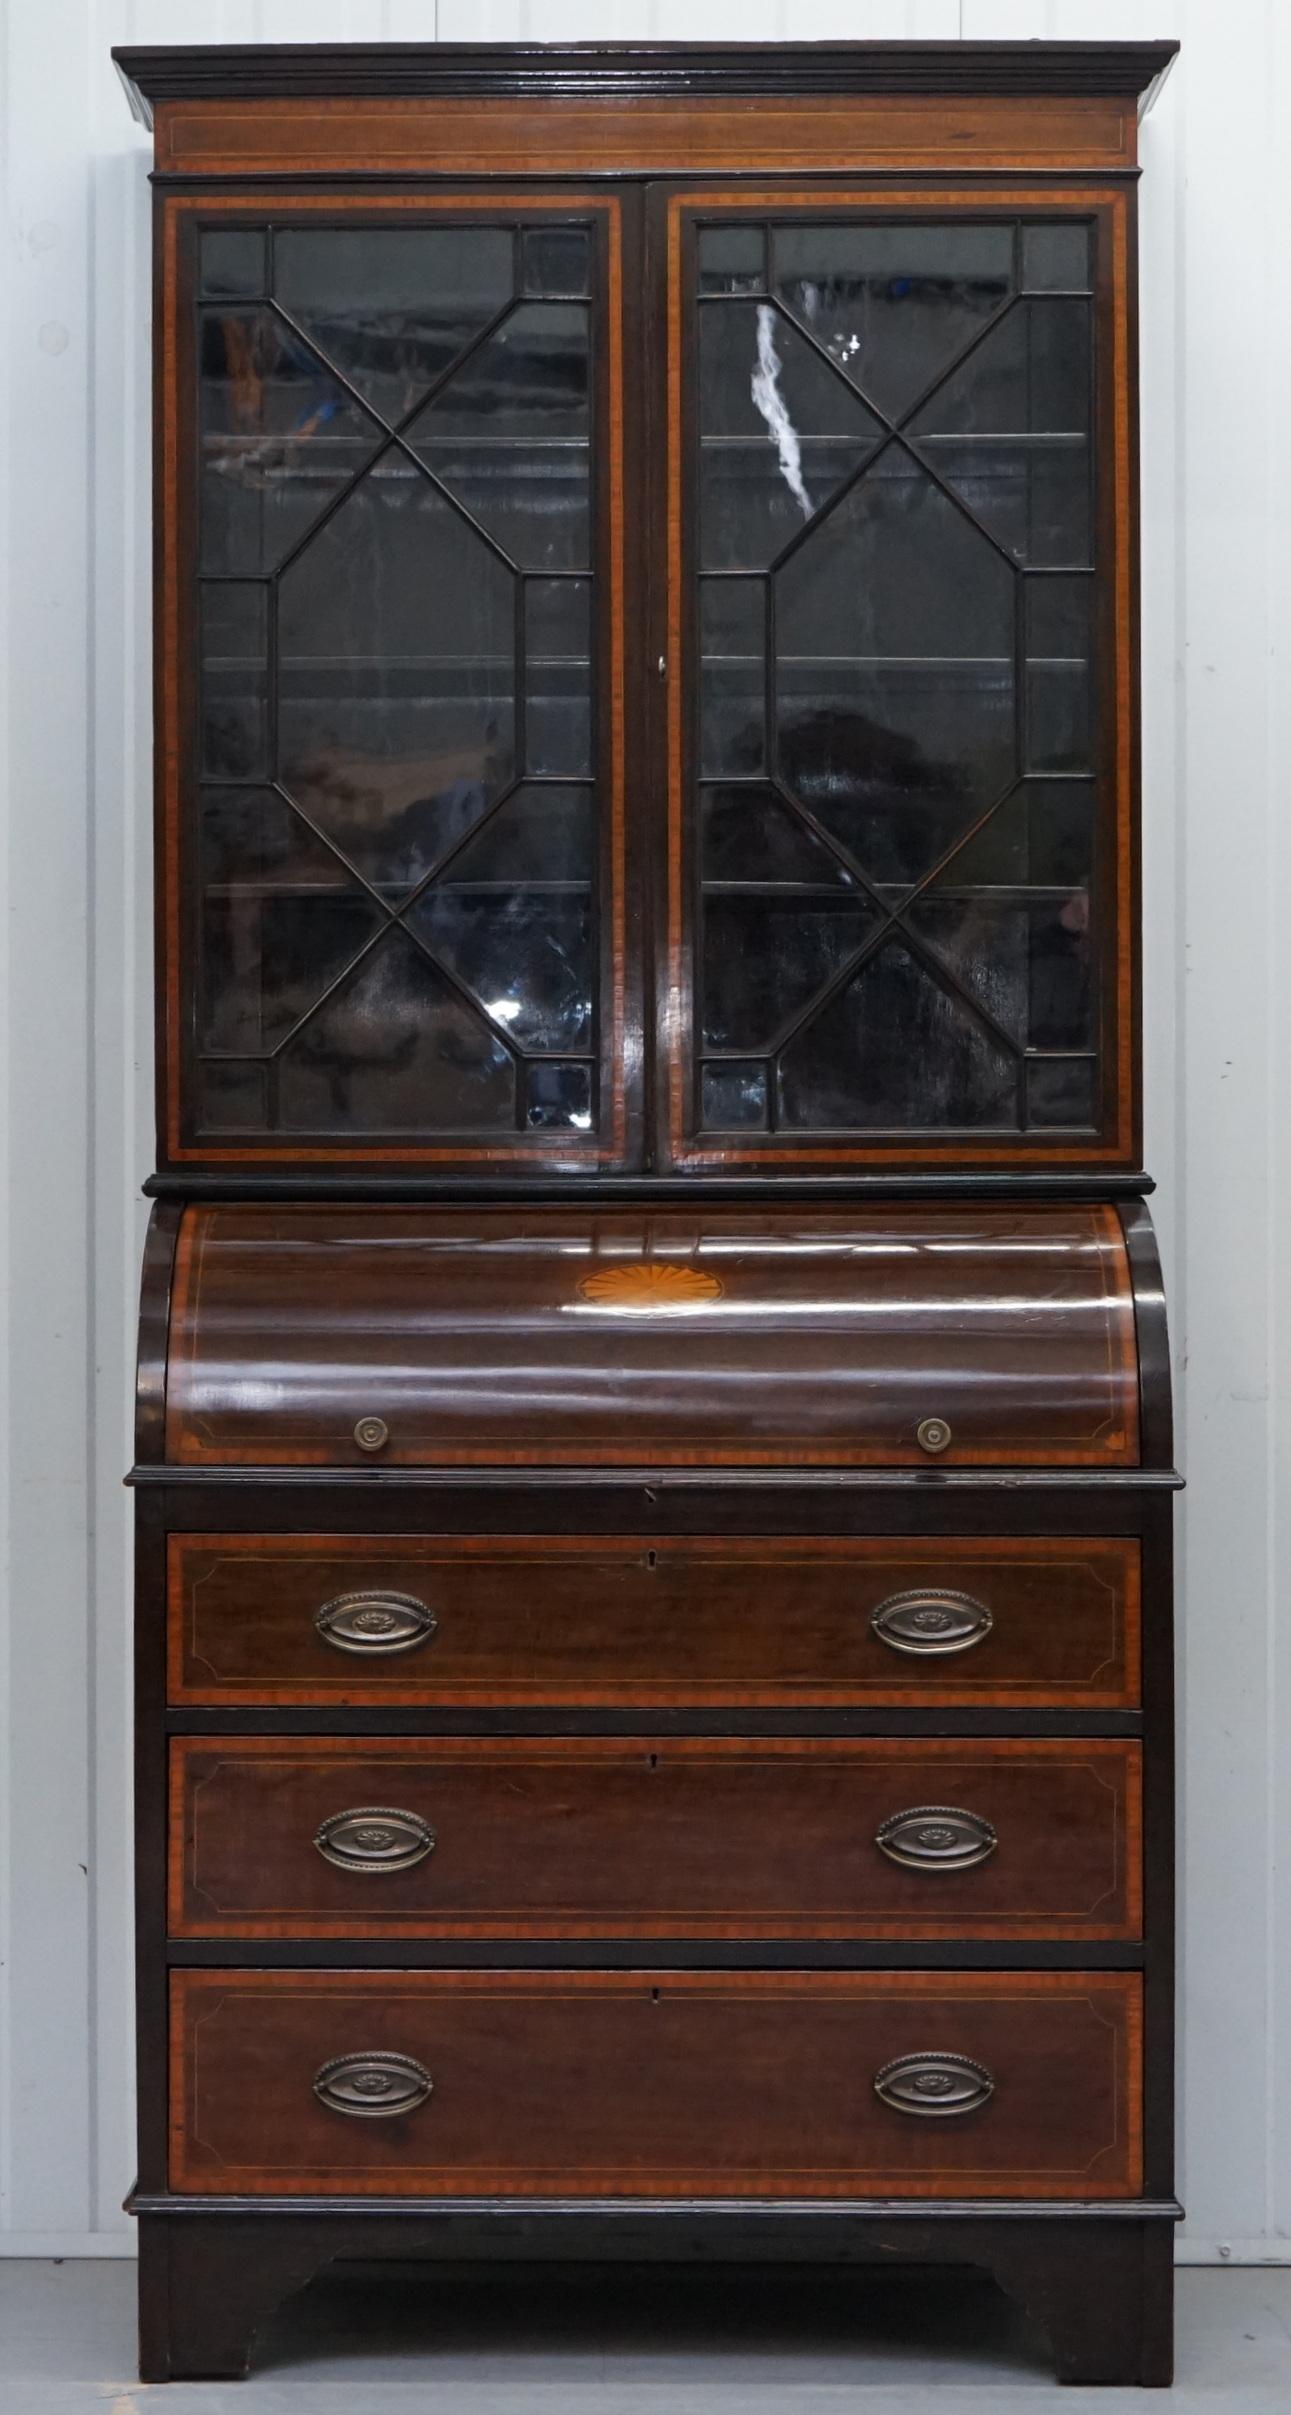 We are delighted to offer for auction this lovely roll top bureau bookcase attributed to Gillows of Lancaster and London.

A stunning piece, the top section is Astral Glazed which was very popular with exceptionally high end cabinets in the